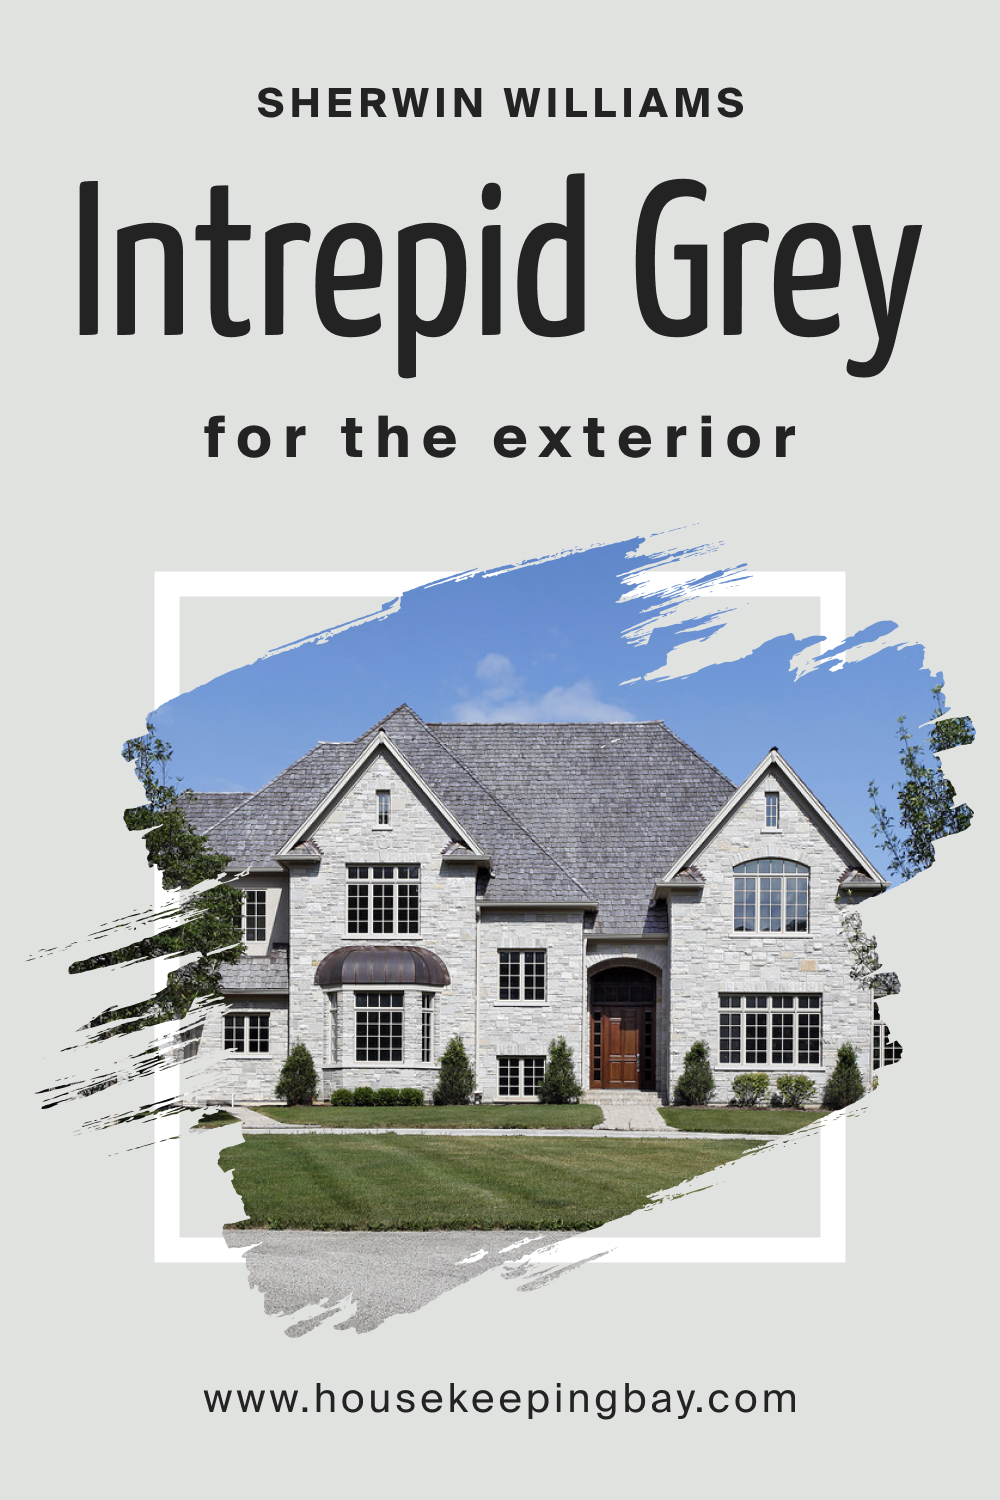 Sherwin Williams. SW 9556 Intrepid Grey For the exterior